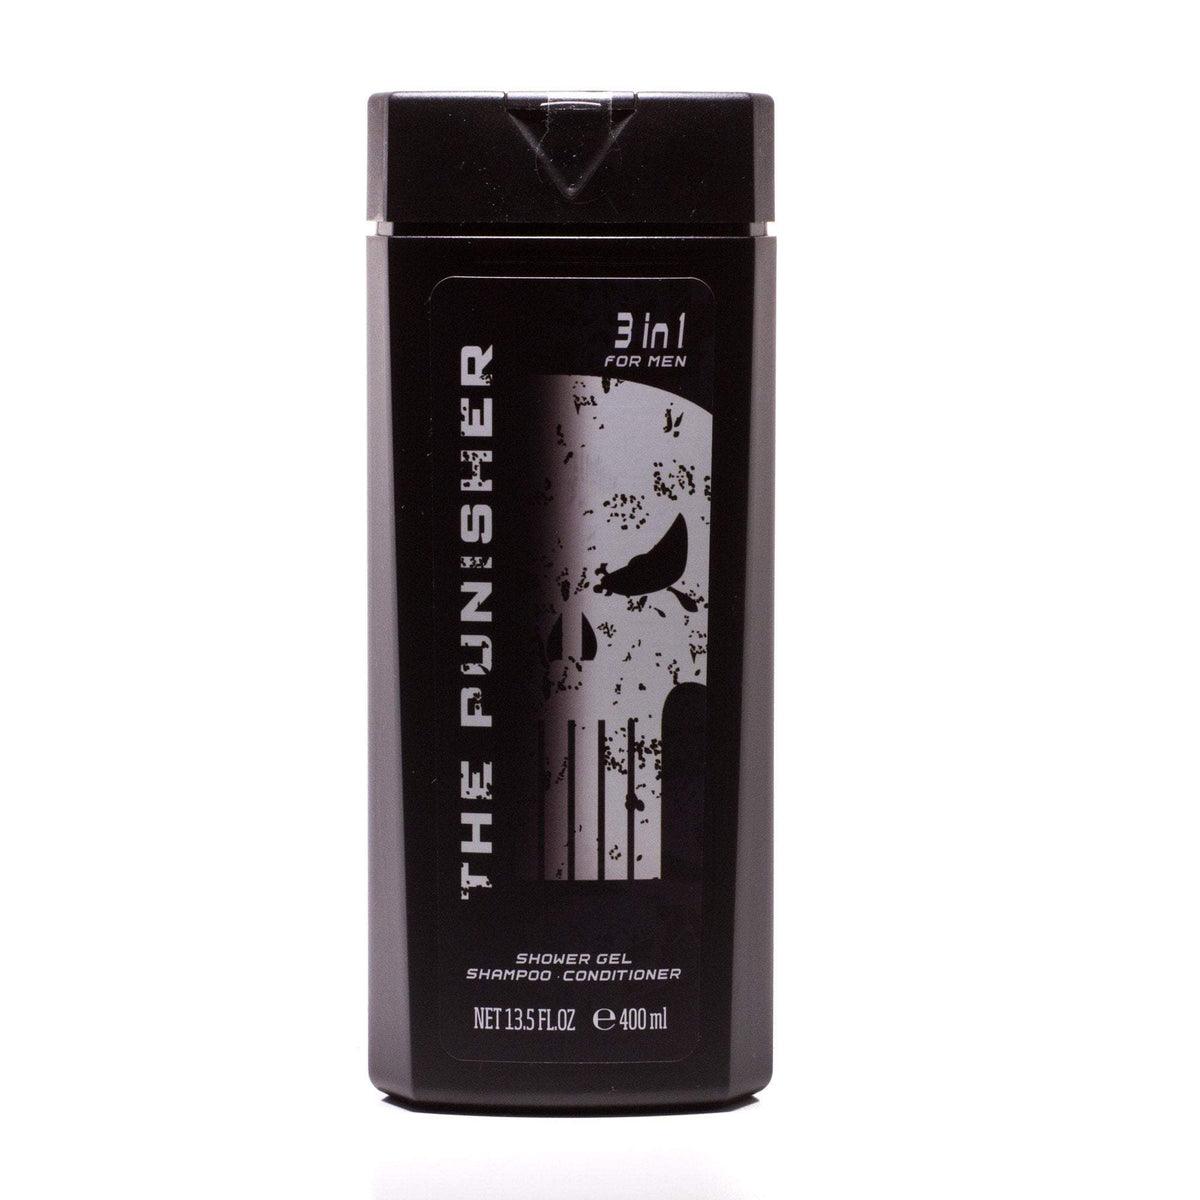 The Punisher All In One Shower Gel for Boys by Marvel